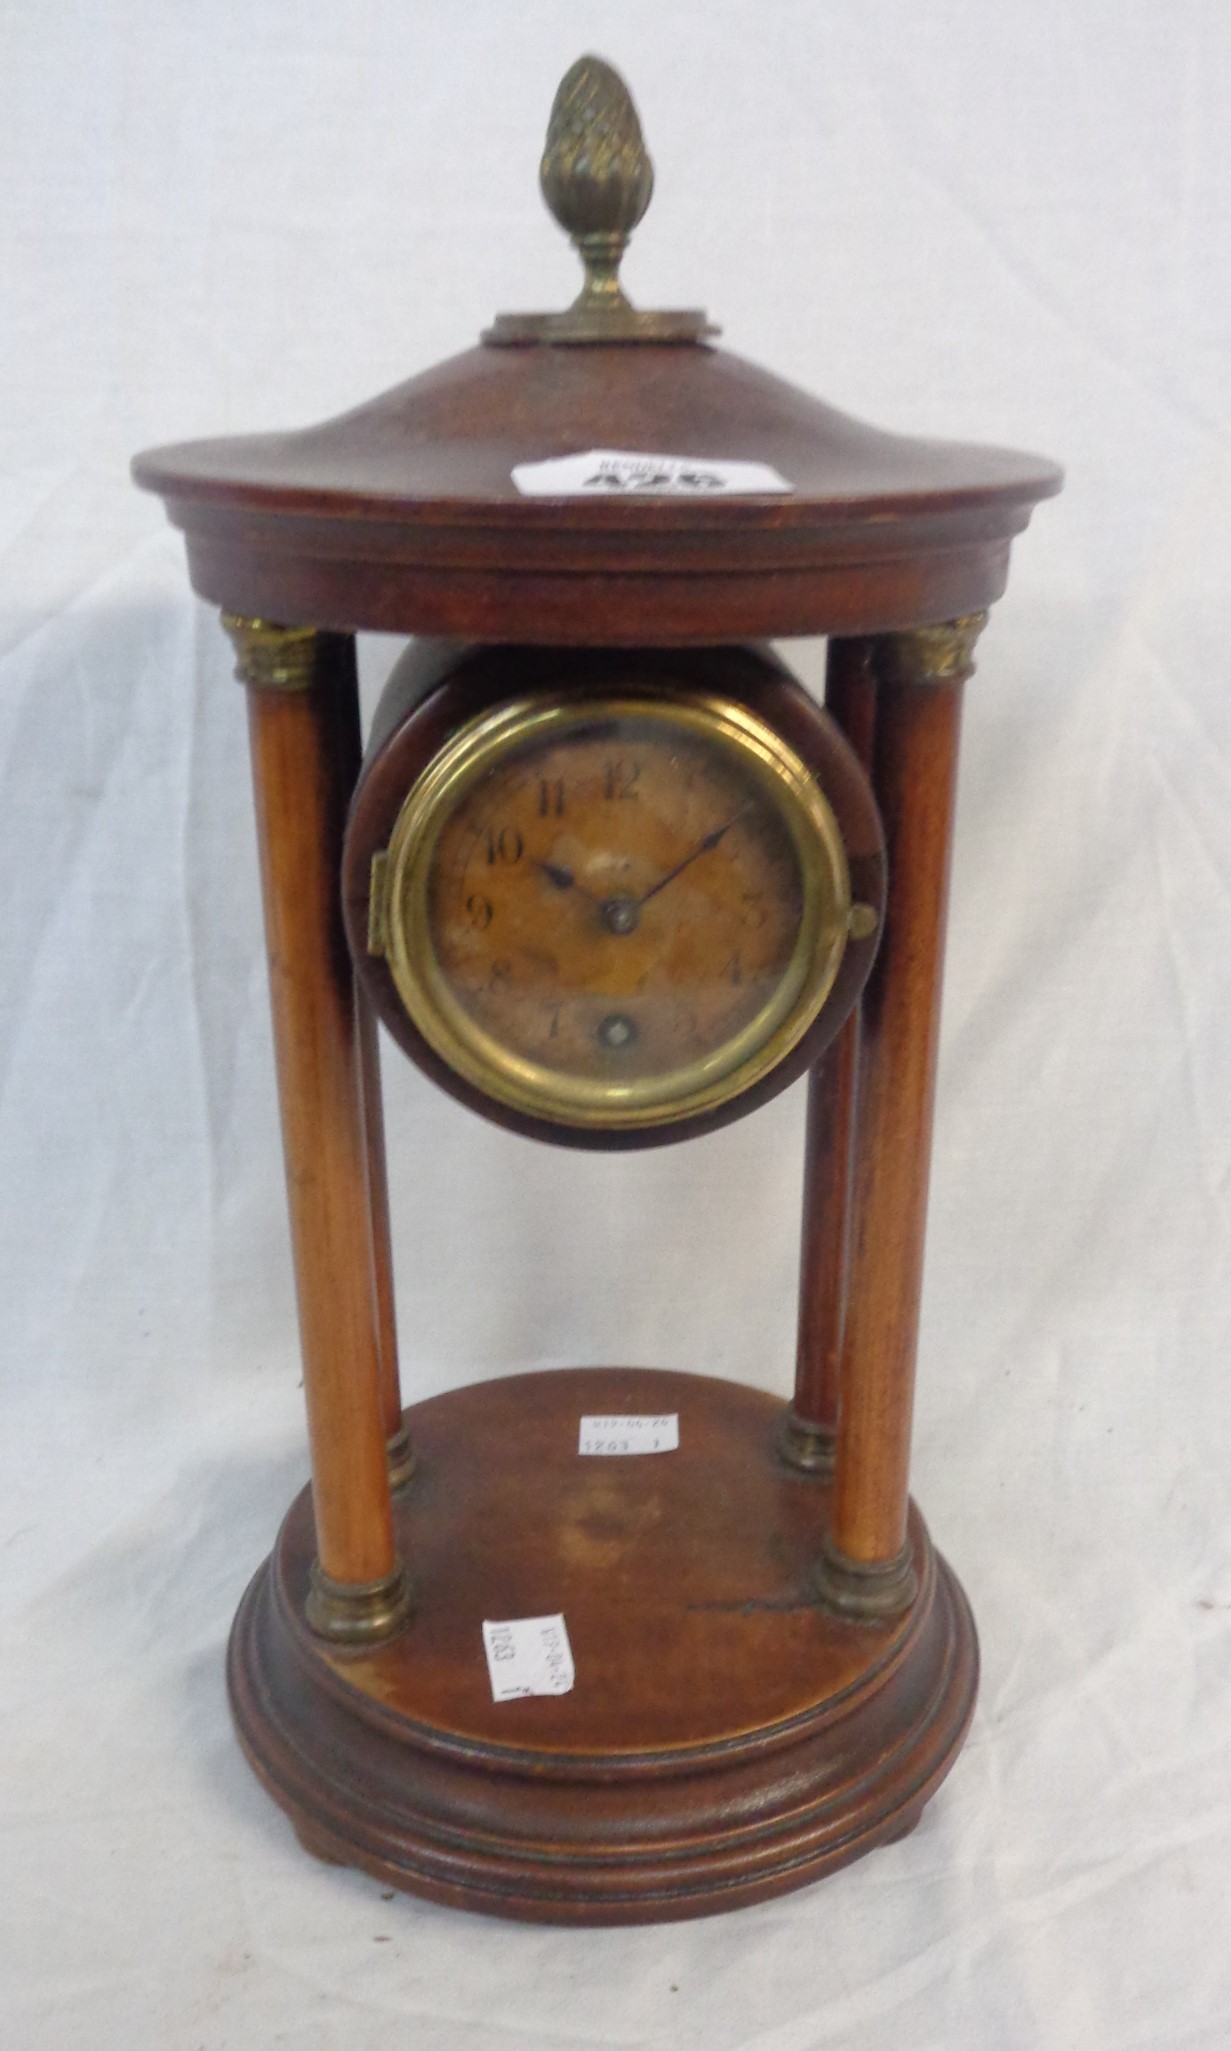 A late Victorian mixed wood portico table timepiece with simple mechanical movement - dial stained